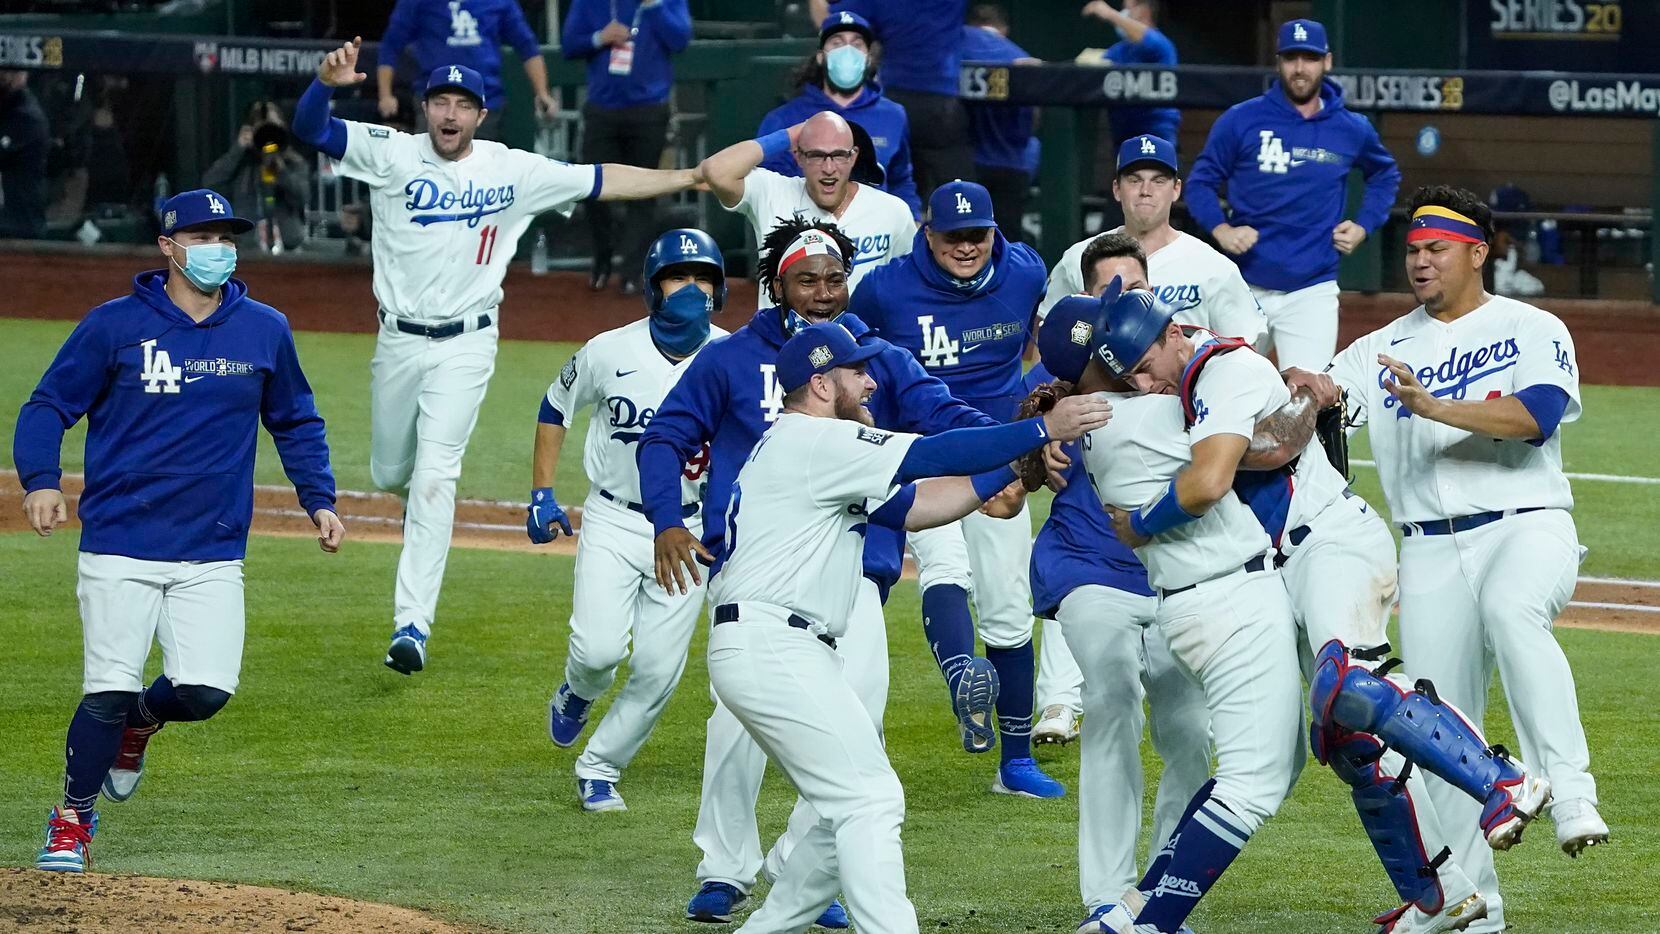 Dogpile Dodgers Celebrate First Title Since 19 After Wild Game 6 Win